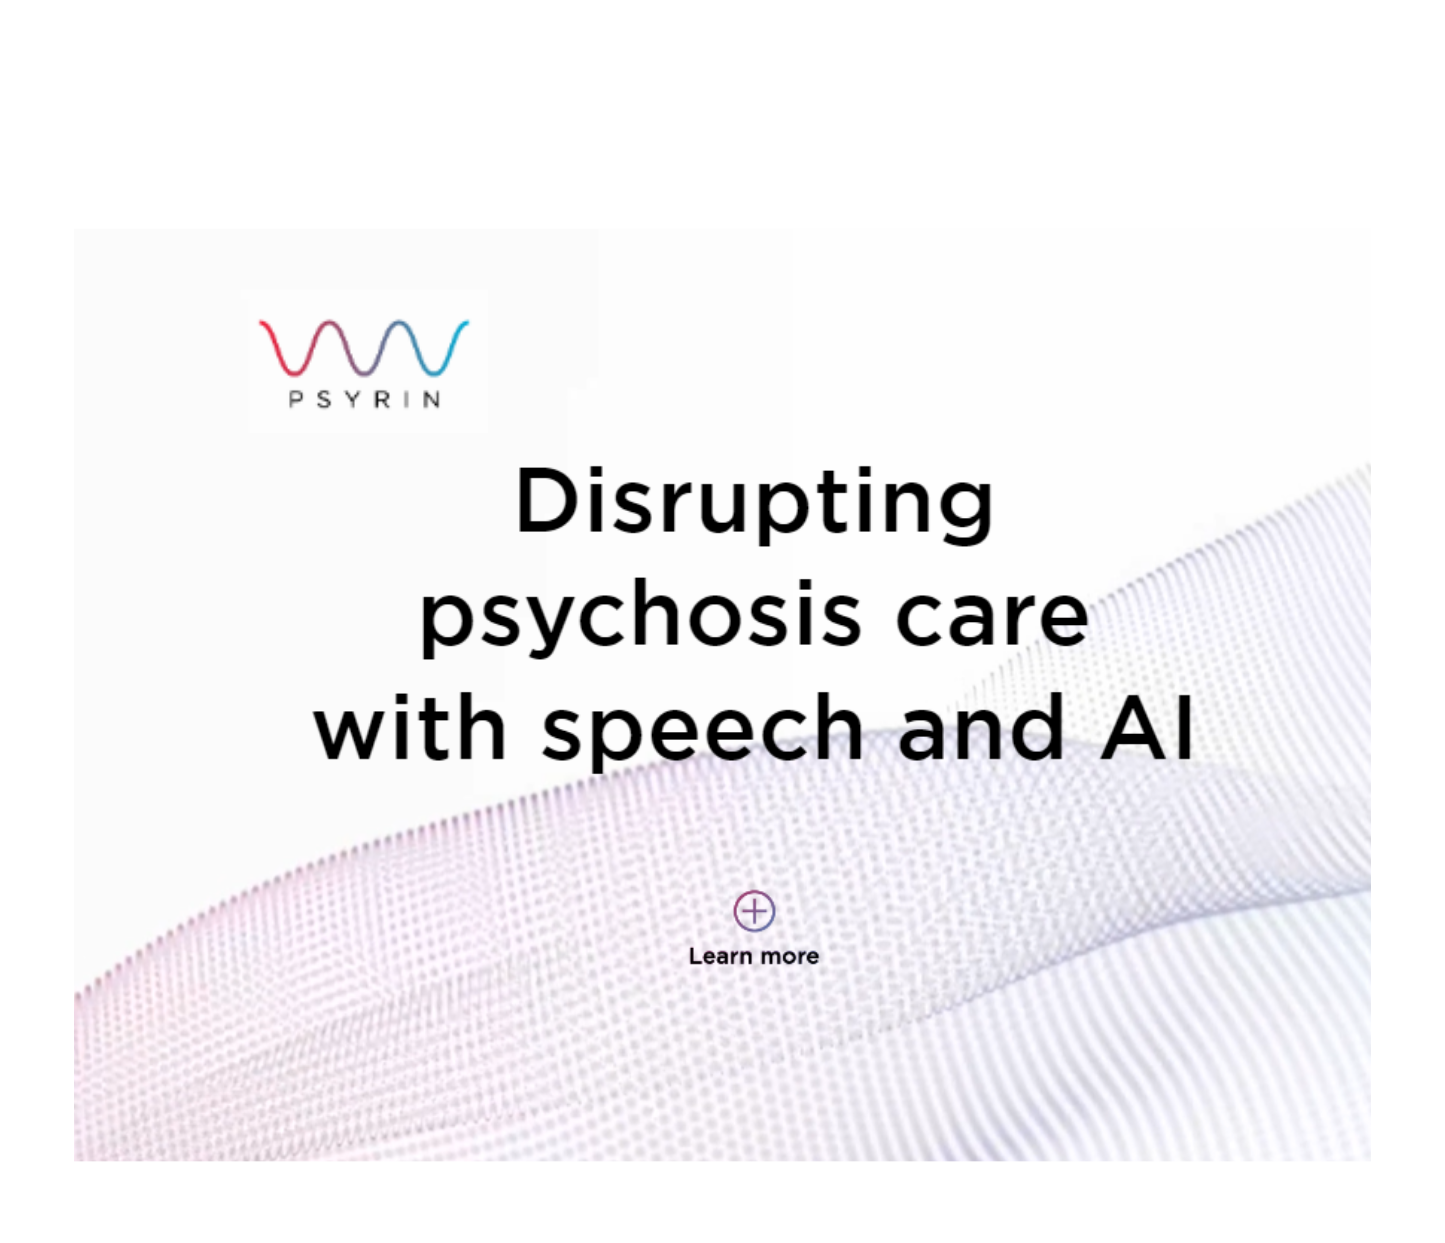 Disrupting psychosis care with speech and AI